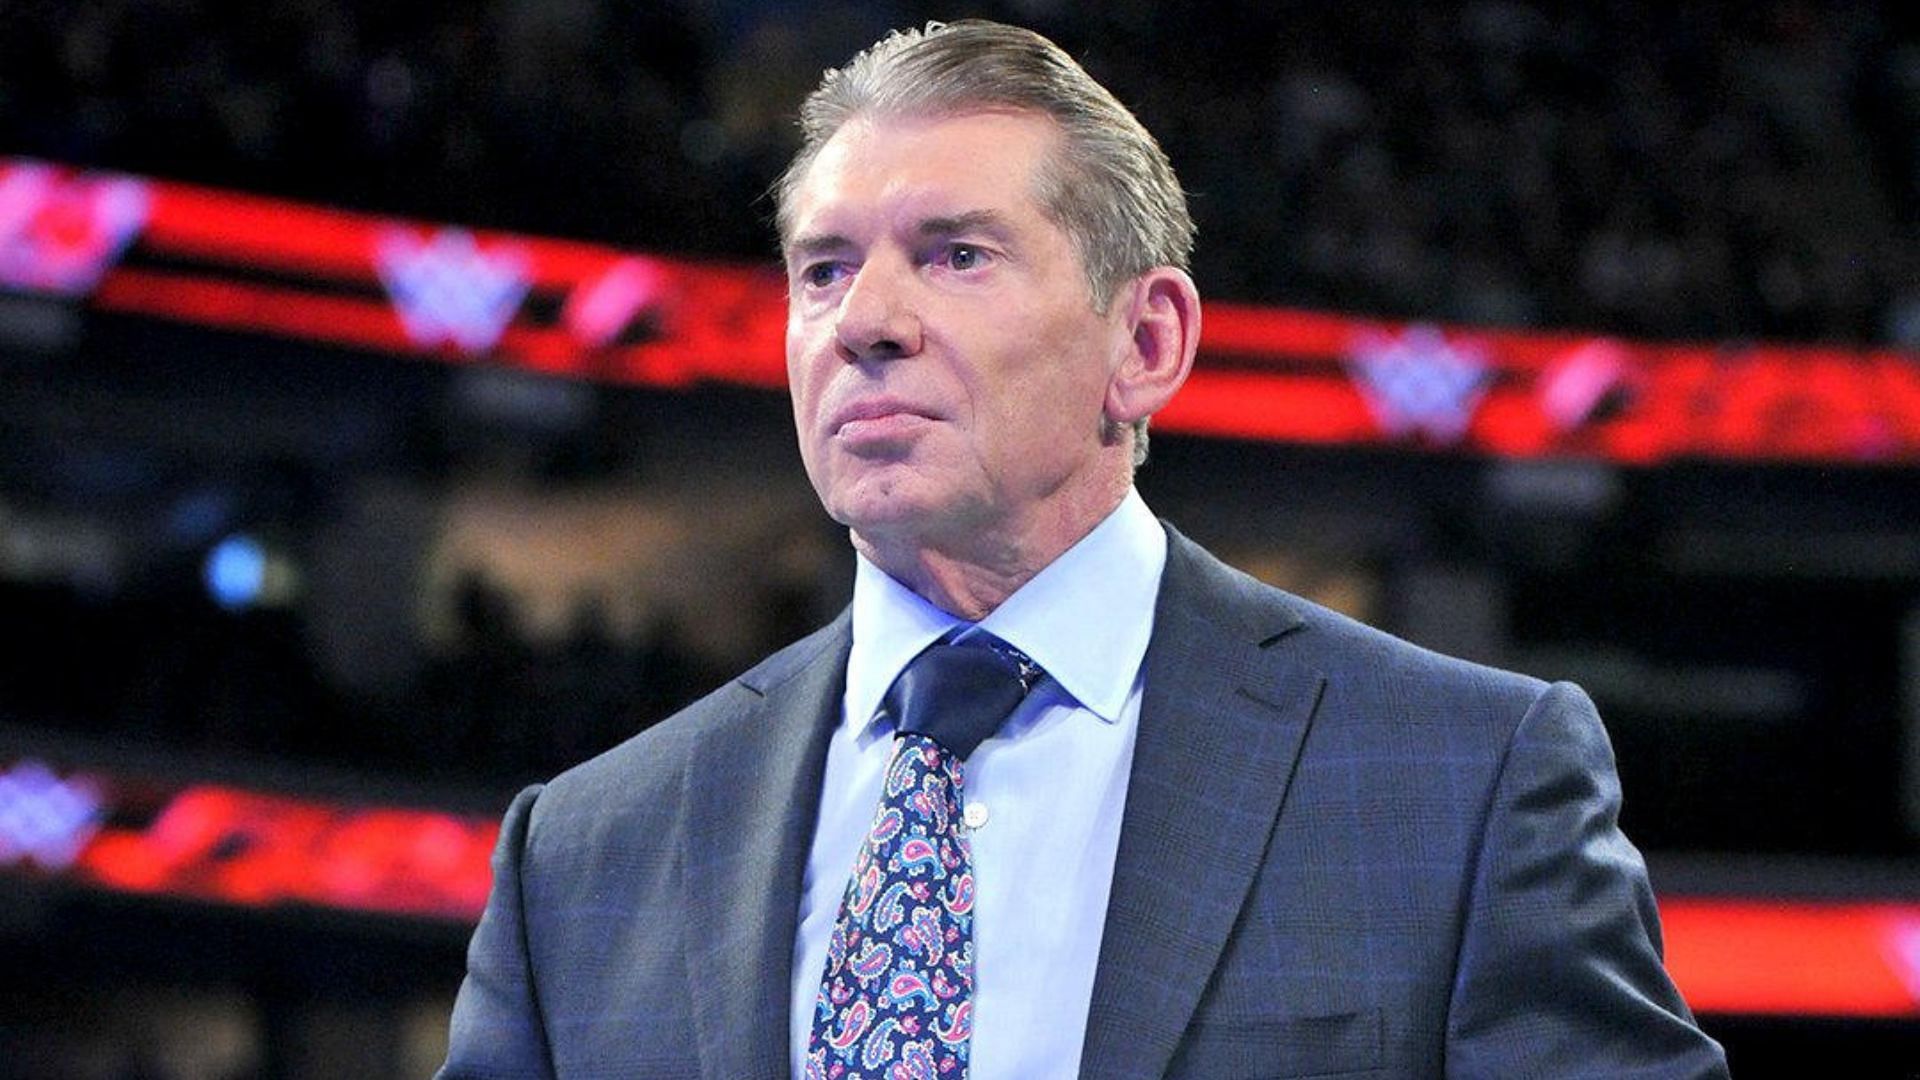 Vince McMahon is no longer associated with WWE in any capacity.